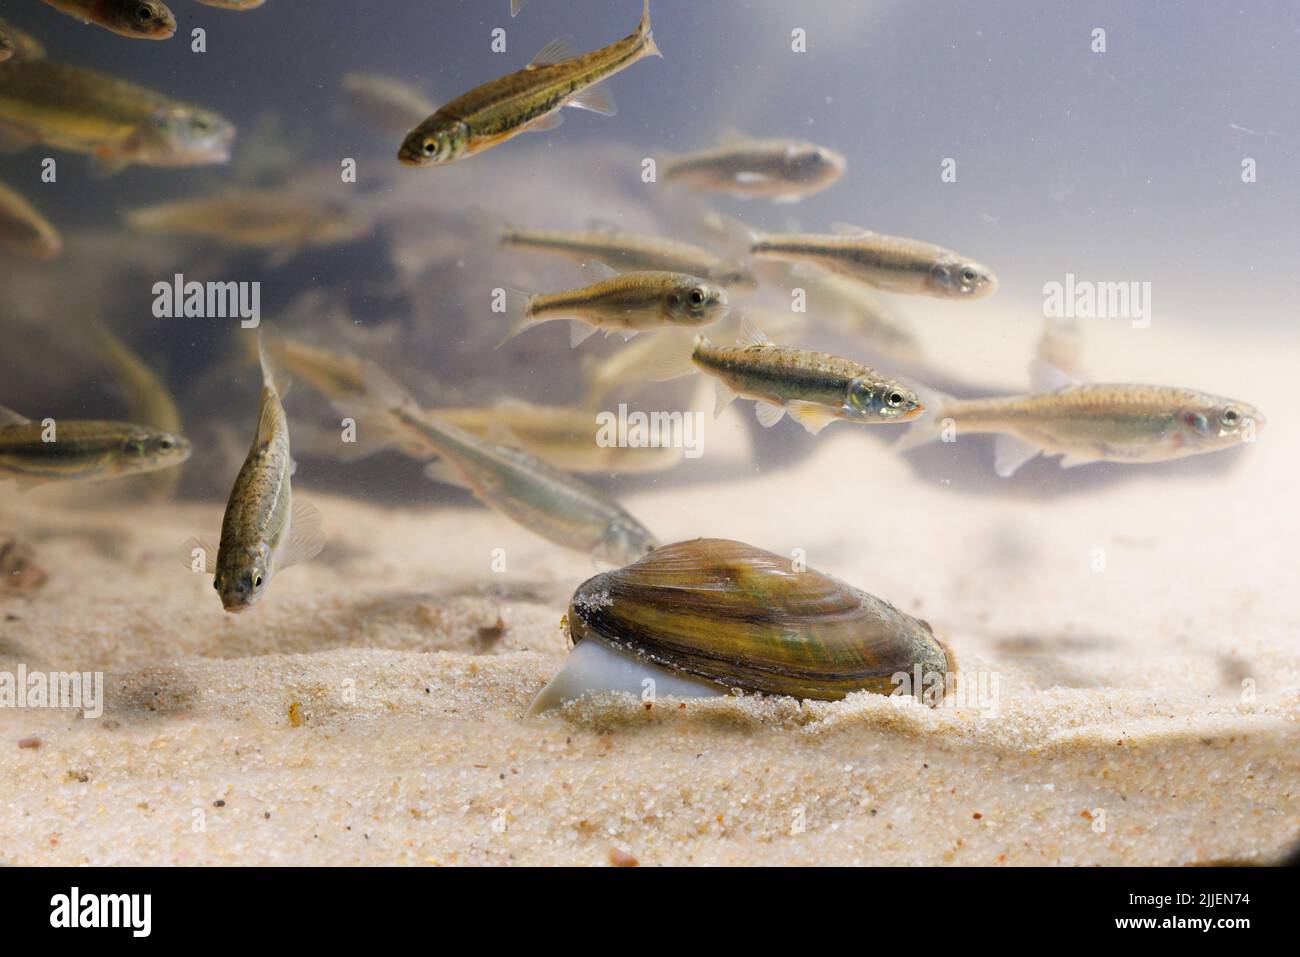 Common river mussel, Common Central European river mussel (Unio crassus), creeping on sandy bottom, with minnows which are hosts for the larvae, Stock Photo